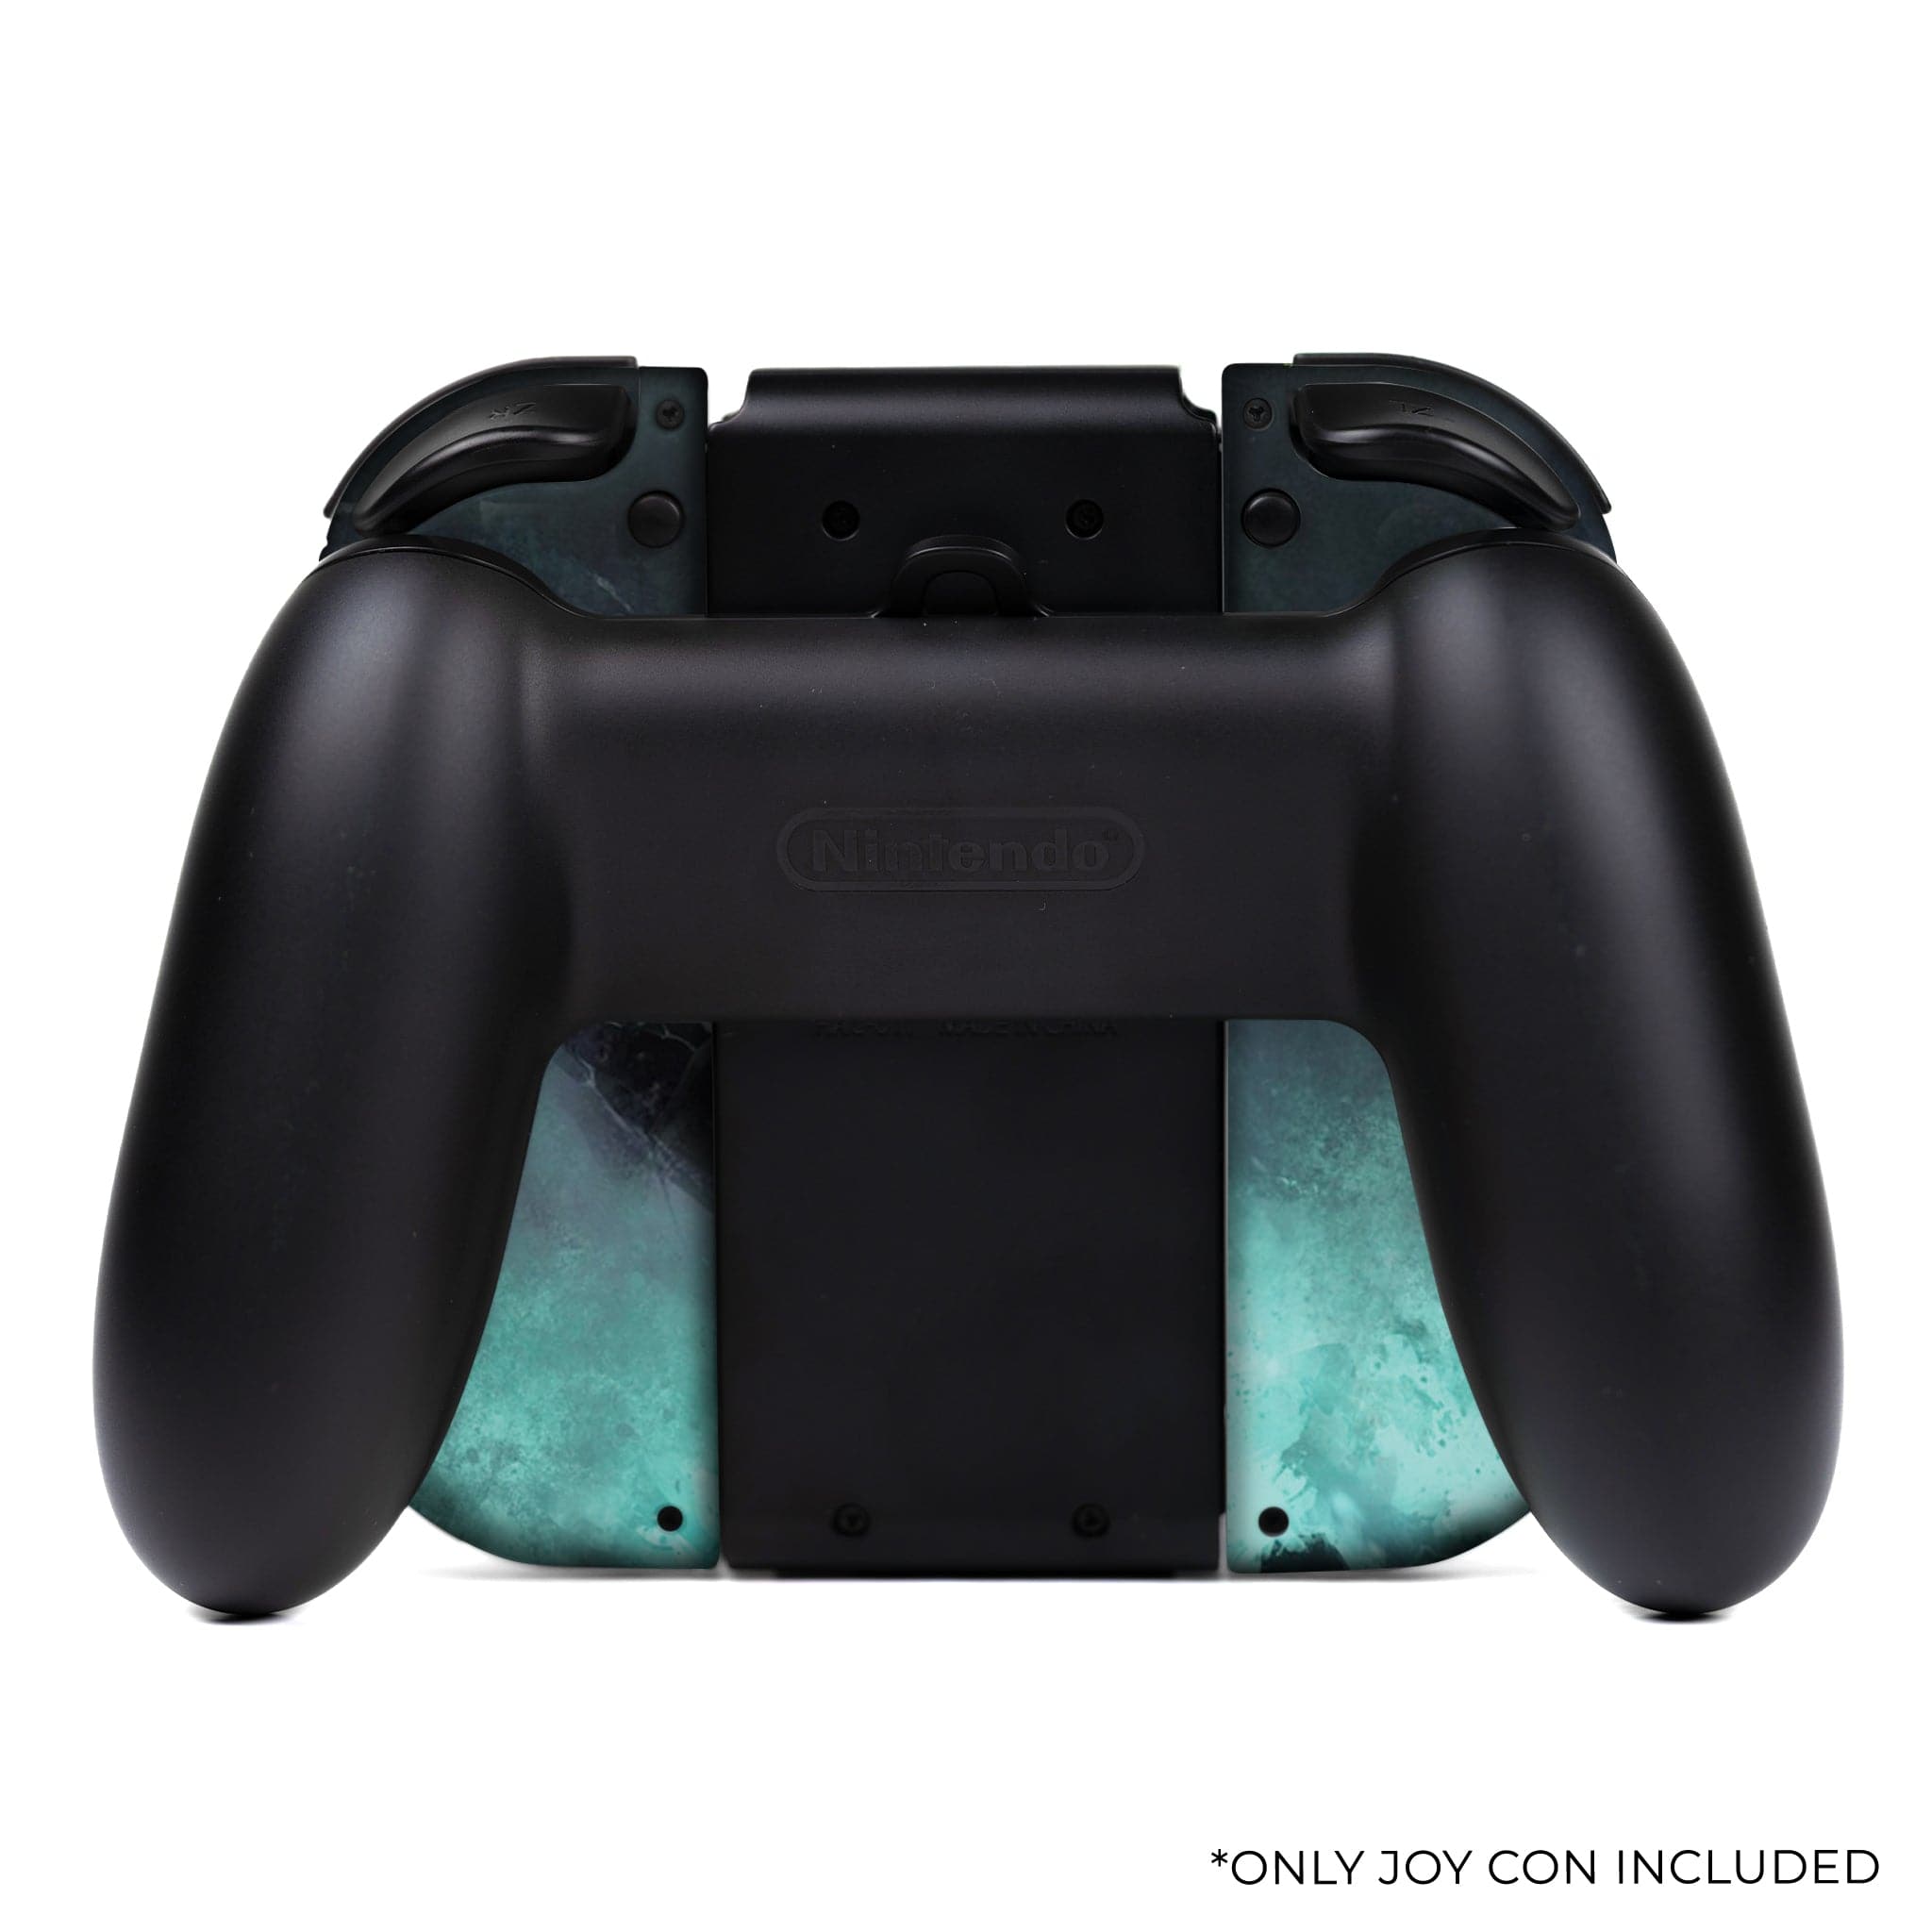 Shattered Inspired Nintendo Switch Controllers